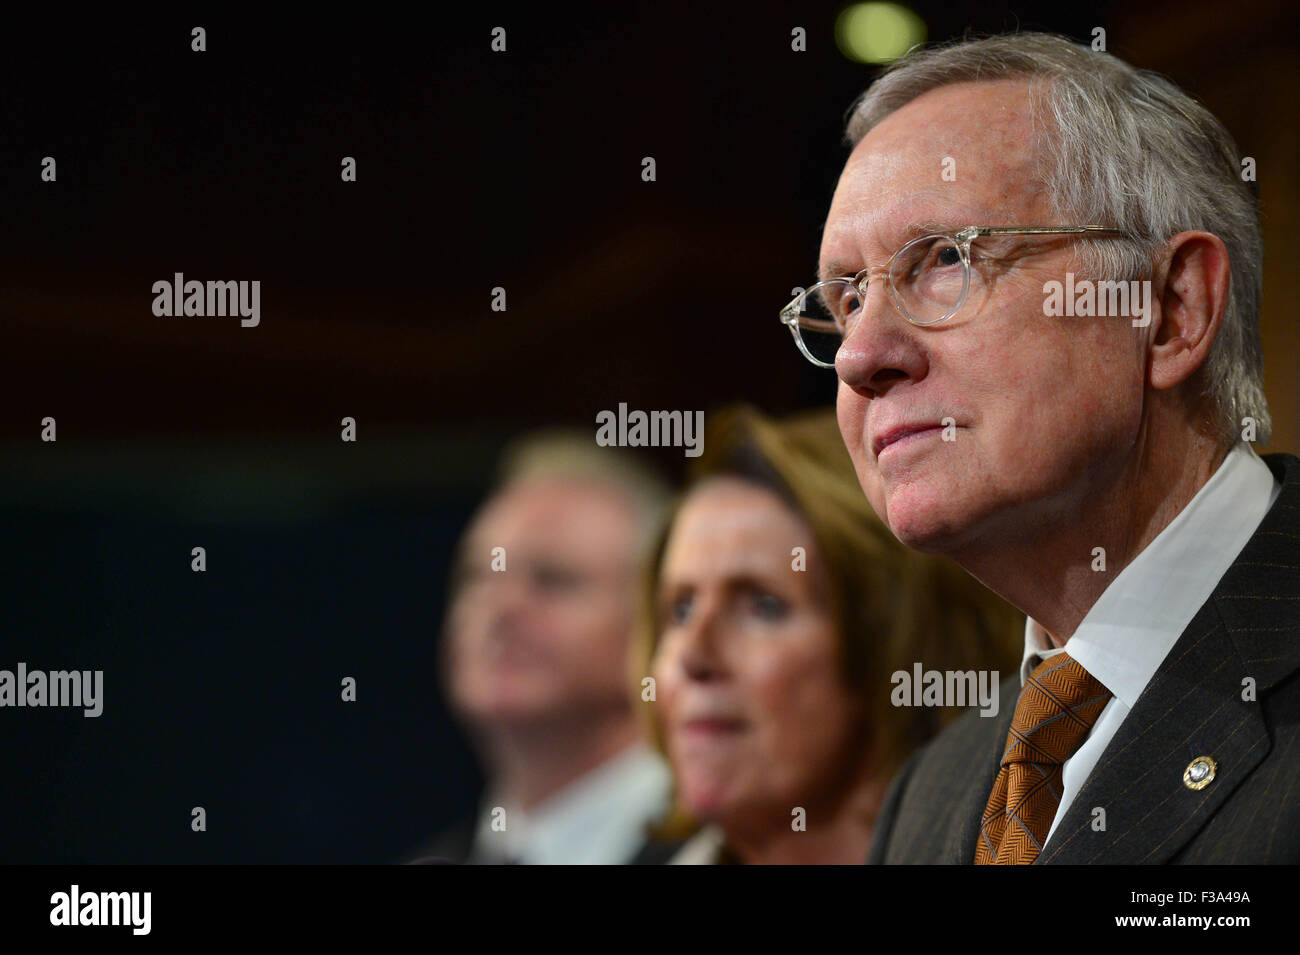 U.S. Senator Minority leader Harry Reid joined by other Democrats discusses a path toward a budget deal during a press conference on Capitol Hill October 1, 2015 in Washington, DC. Stock Photo